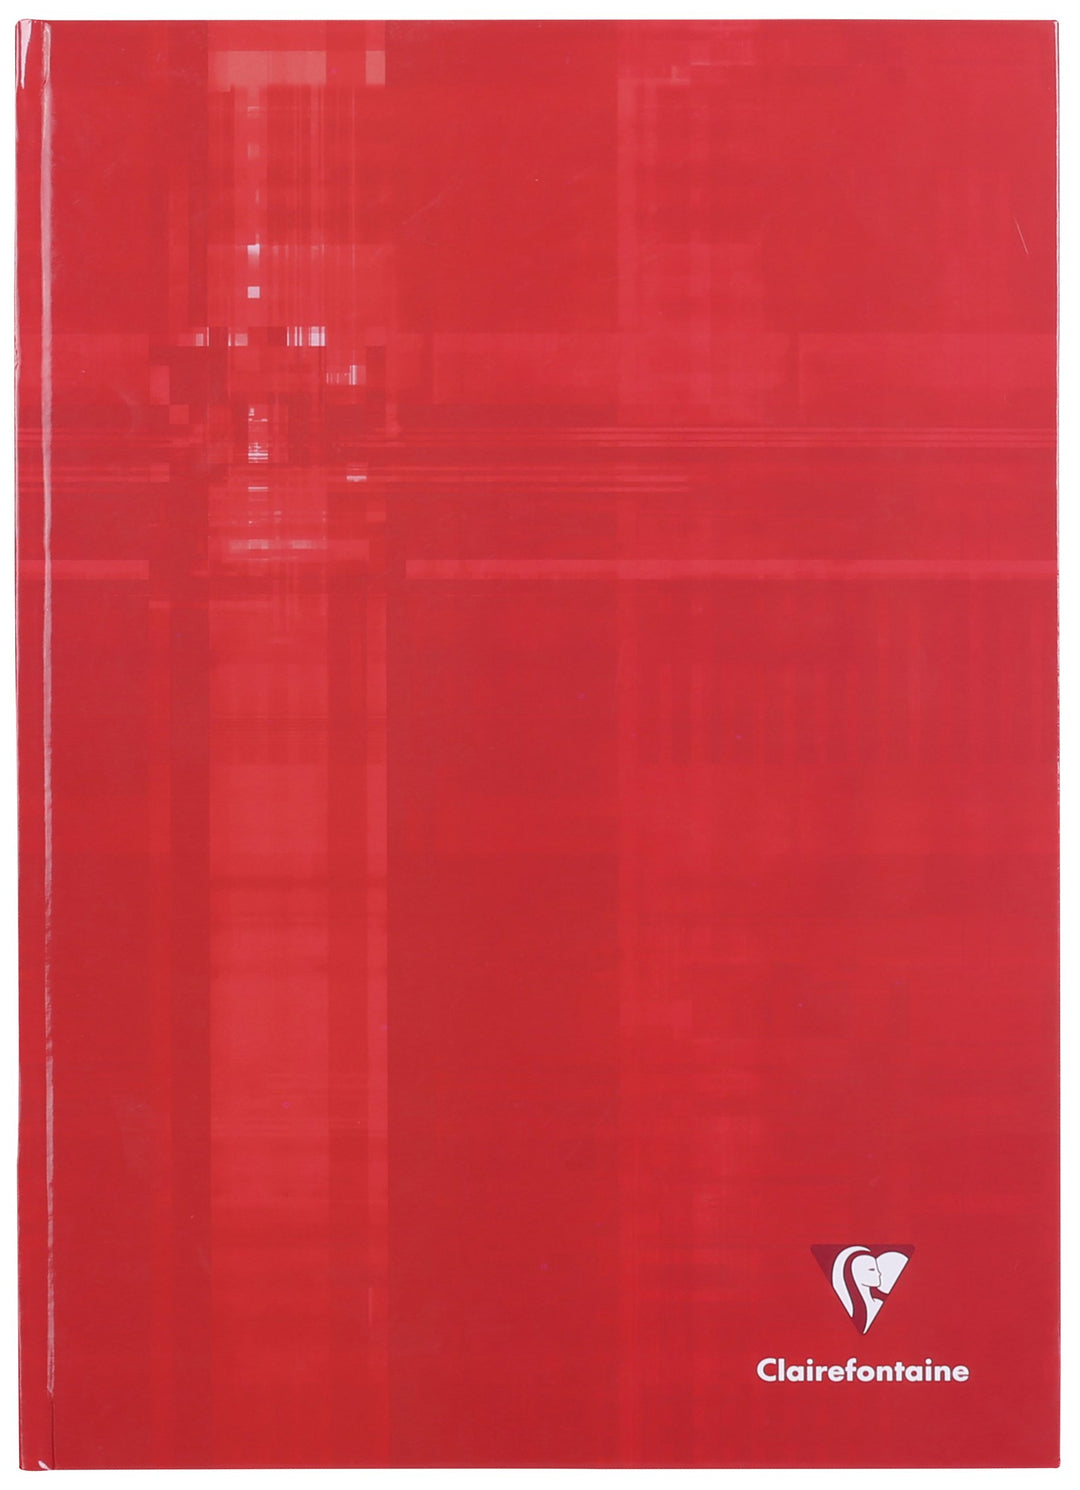 Clairefontaine Basics Line + Margin Ruled Hardcover Notebook - A4